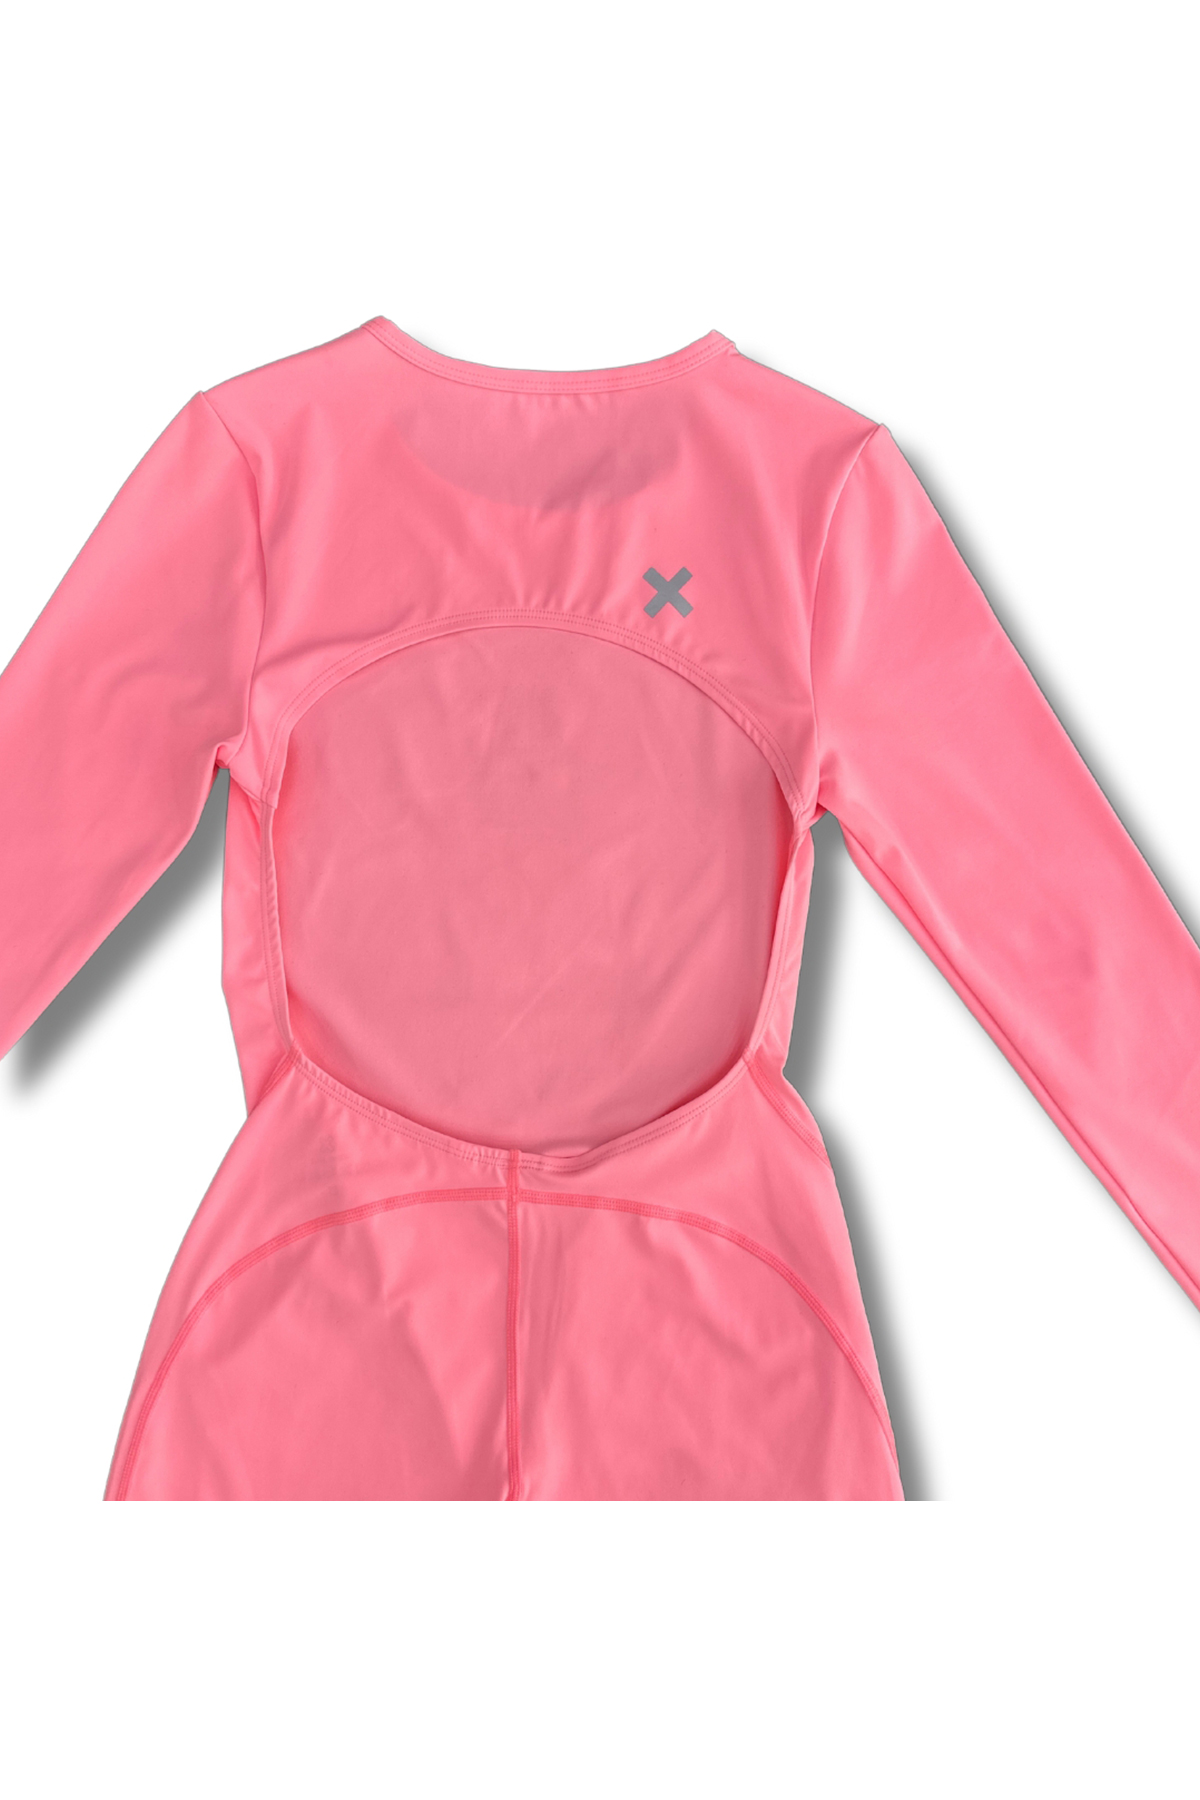 Fitted-Long-sleeved-Mid-Thigh-Yoga-Unitard-pink-back-close